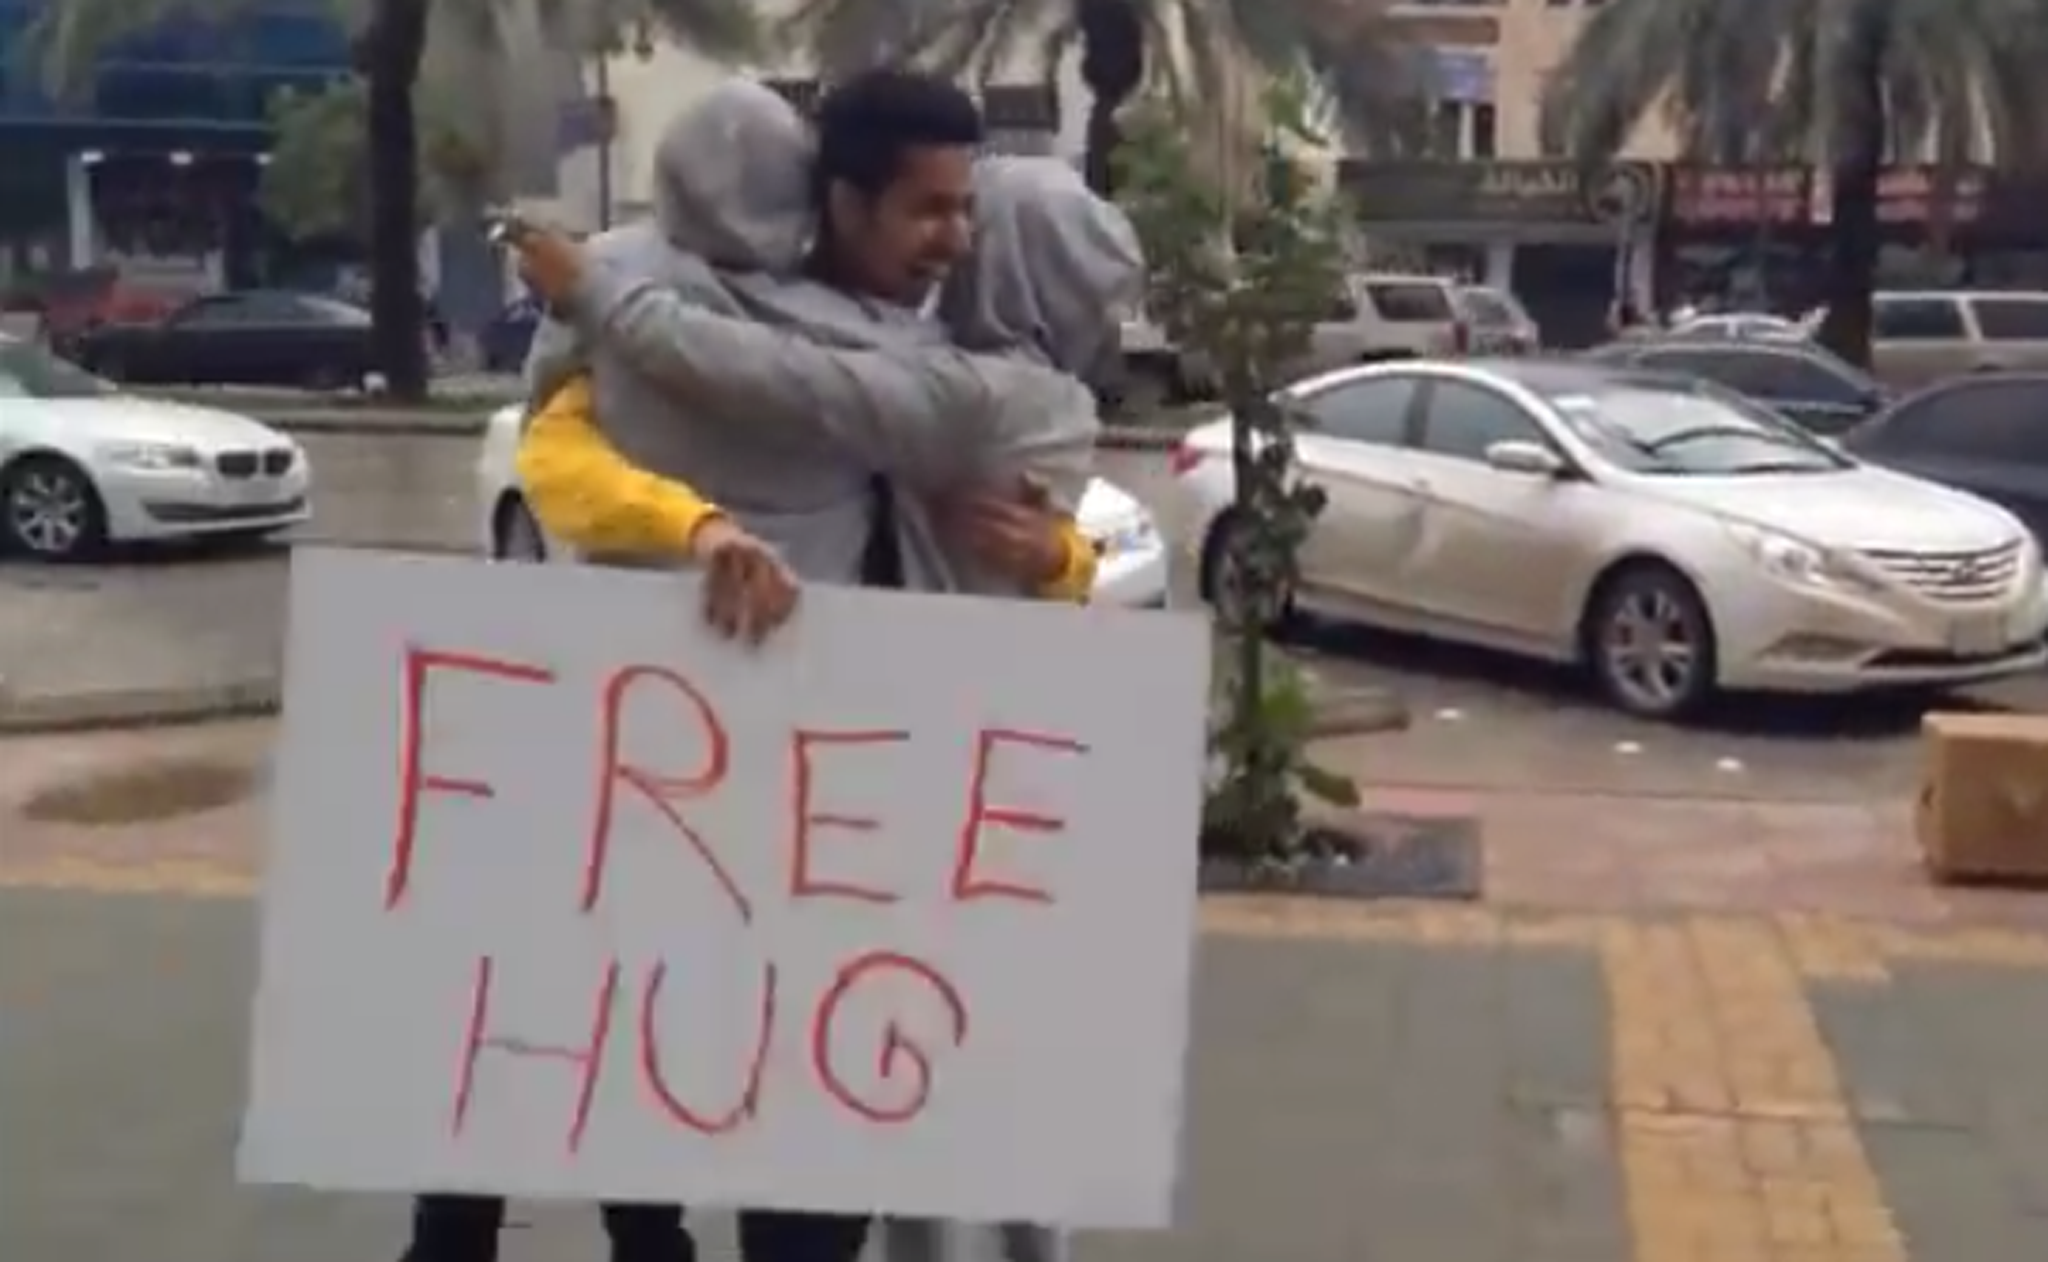 A still from the free hug campaign that inspired al-Khayyal